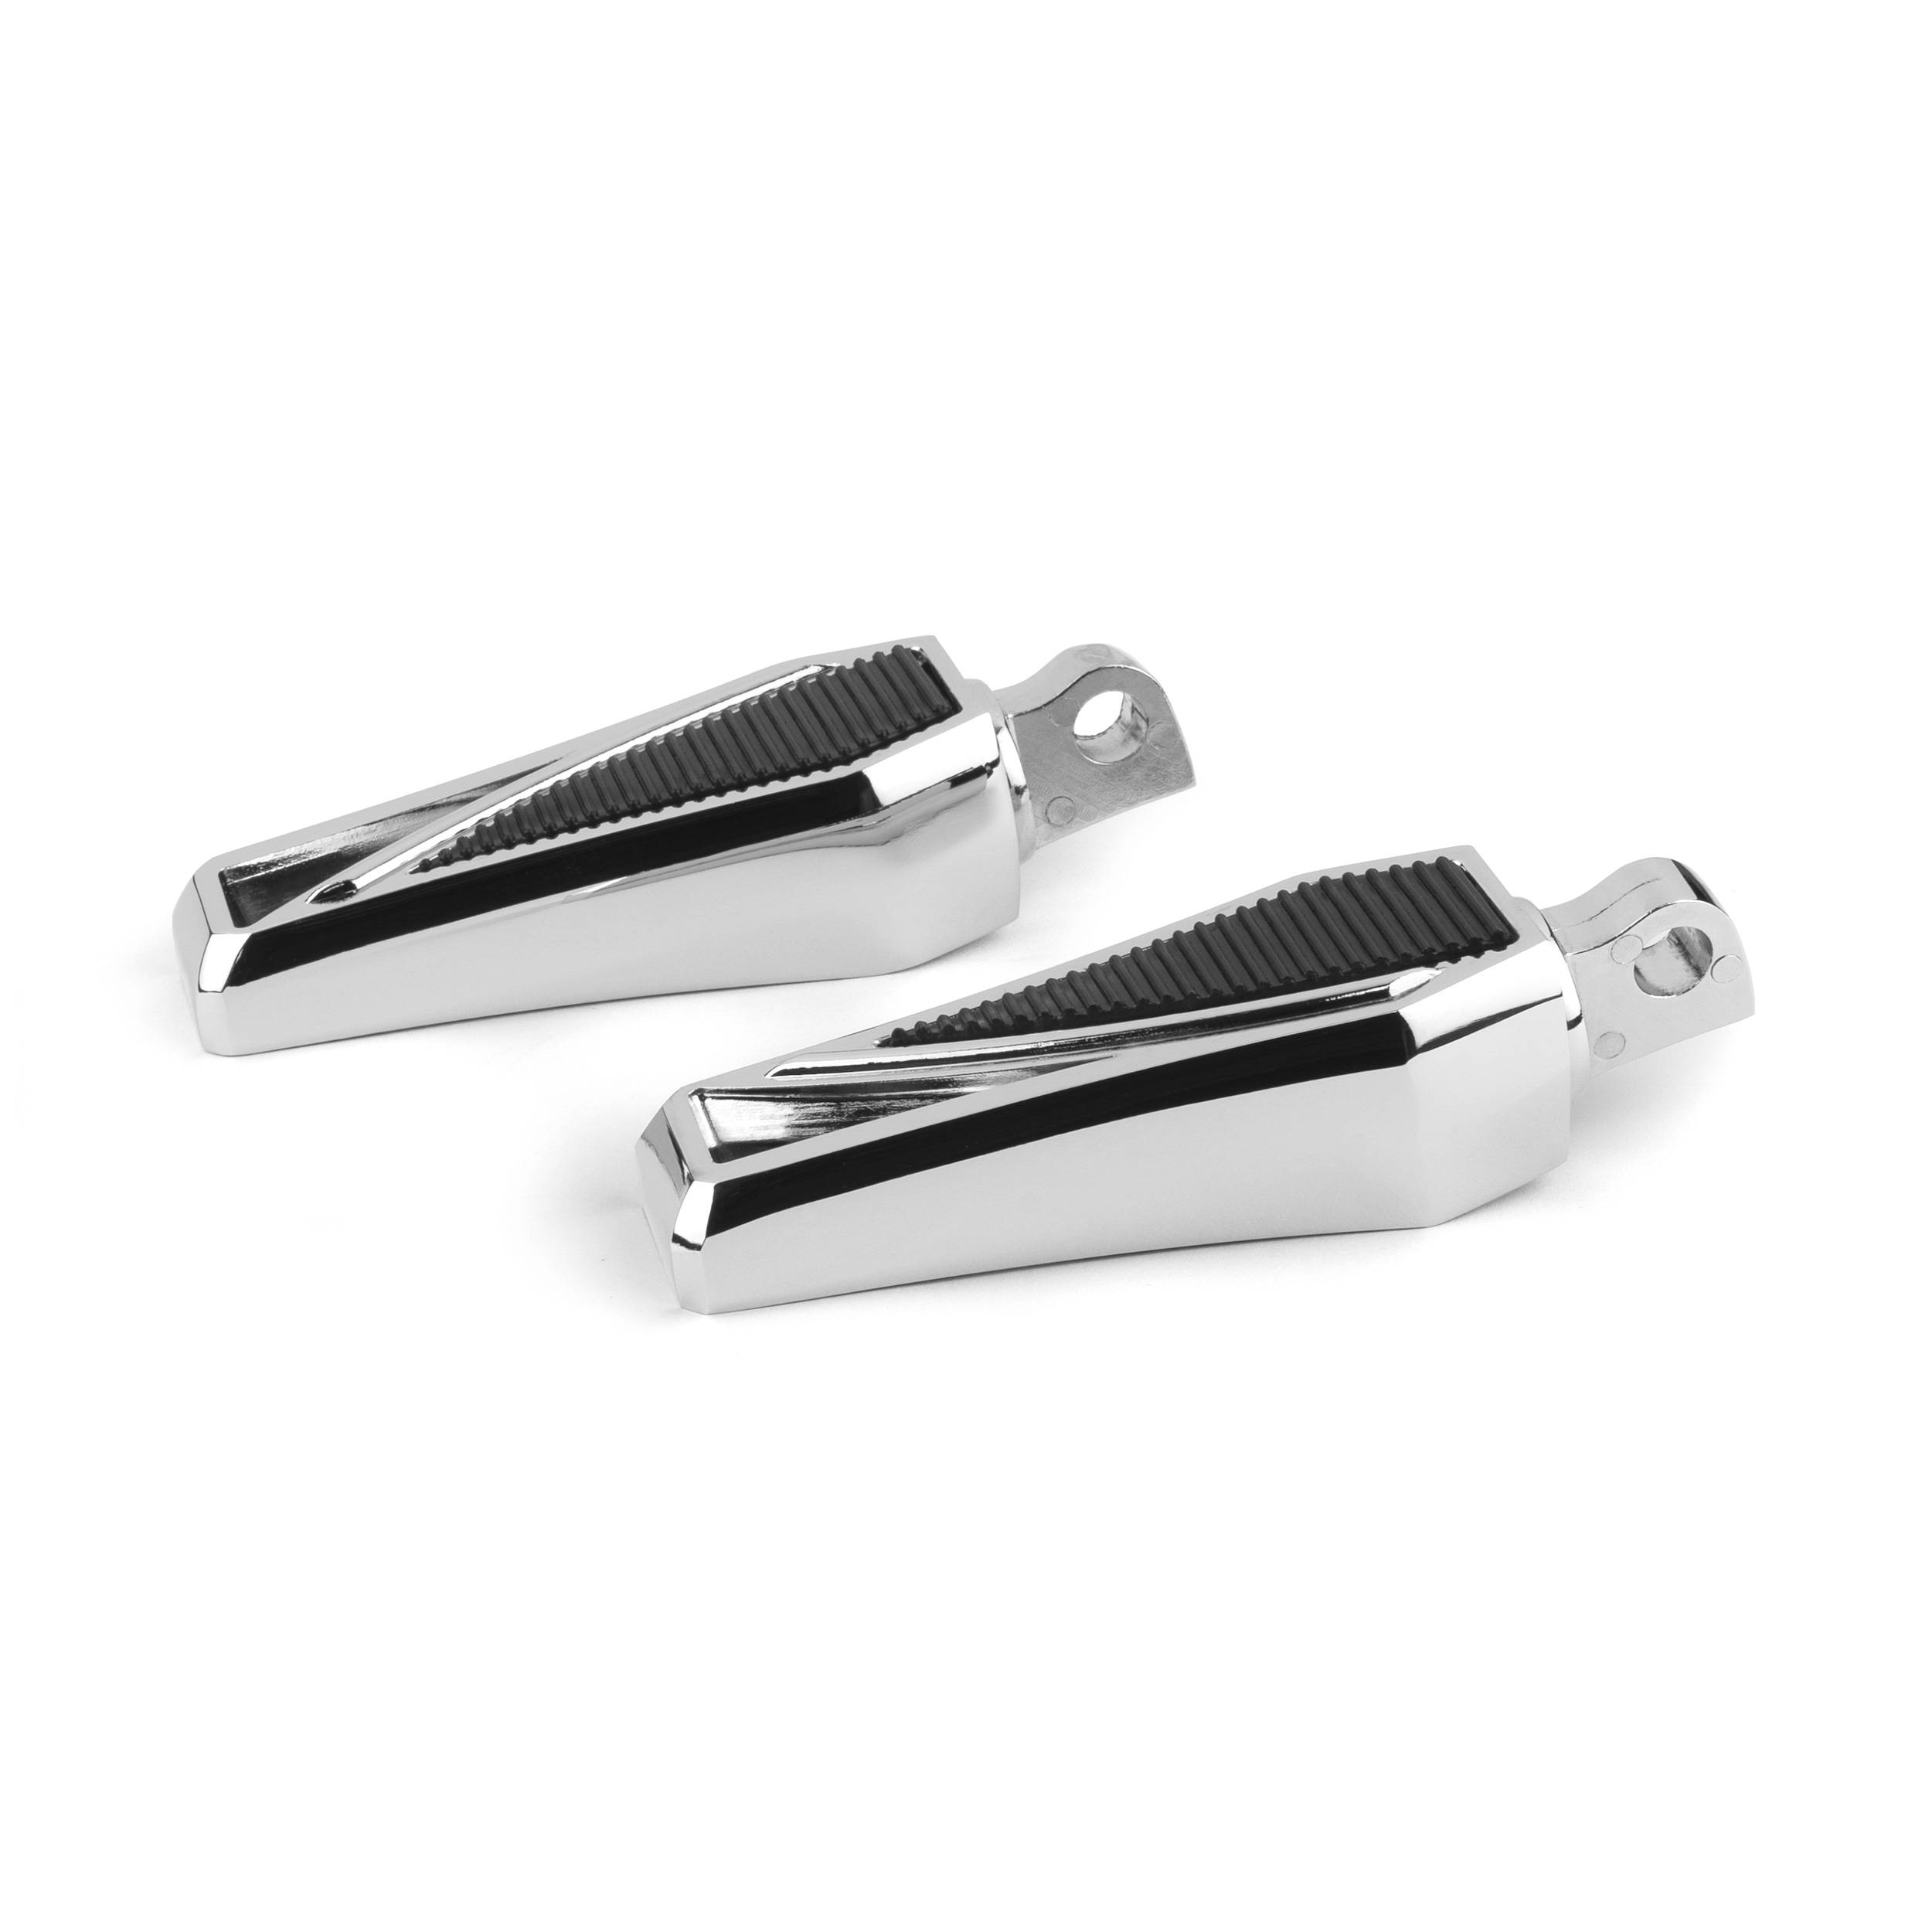 Krator Phantom Foot Pegs Footrest, 1 Pair, Chrome, Compatible with 1989-2022 Harley Davidson Electra Glide Ultra Classic FLHTCU